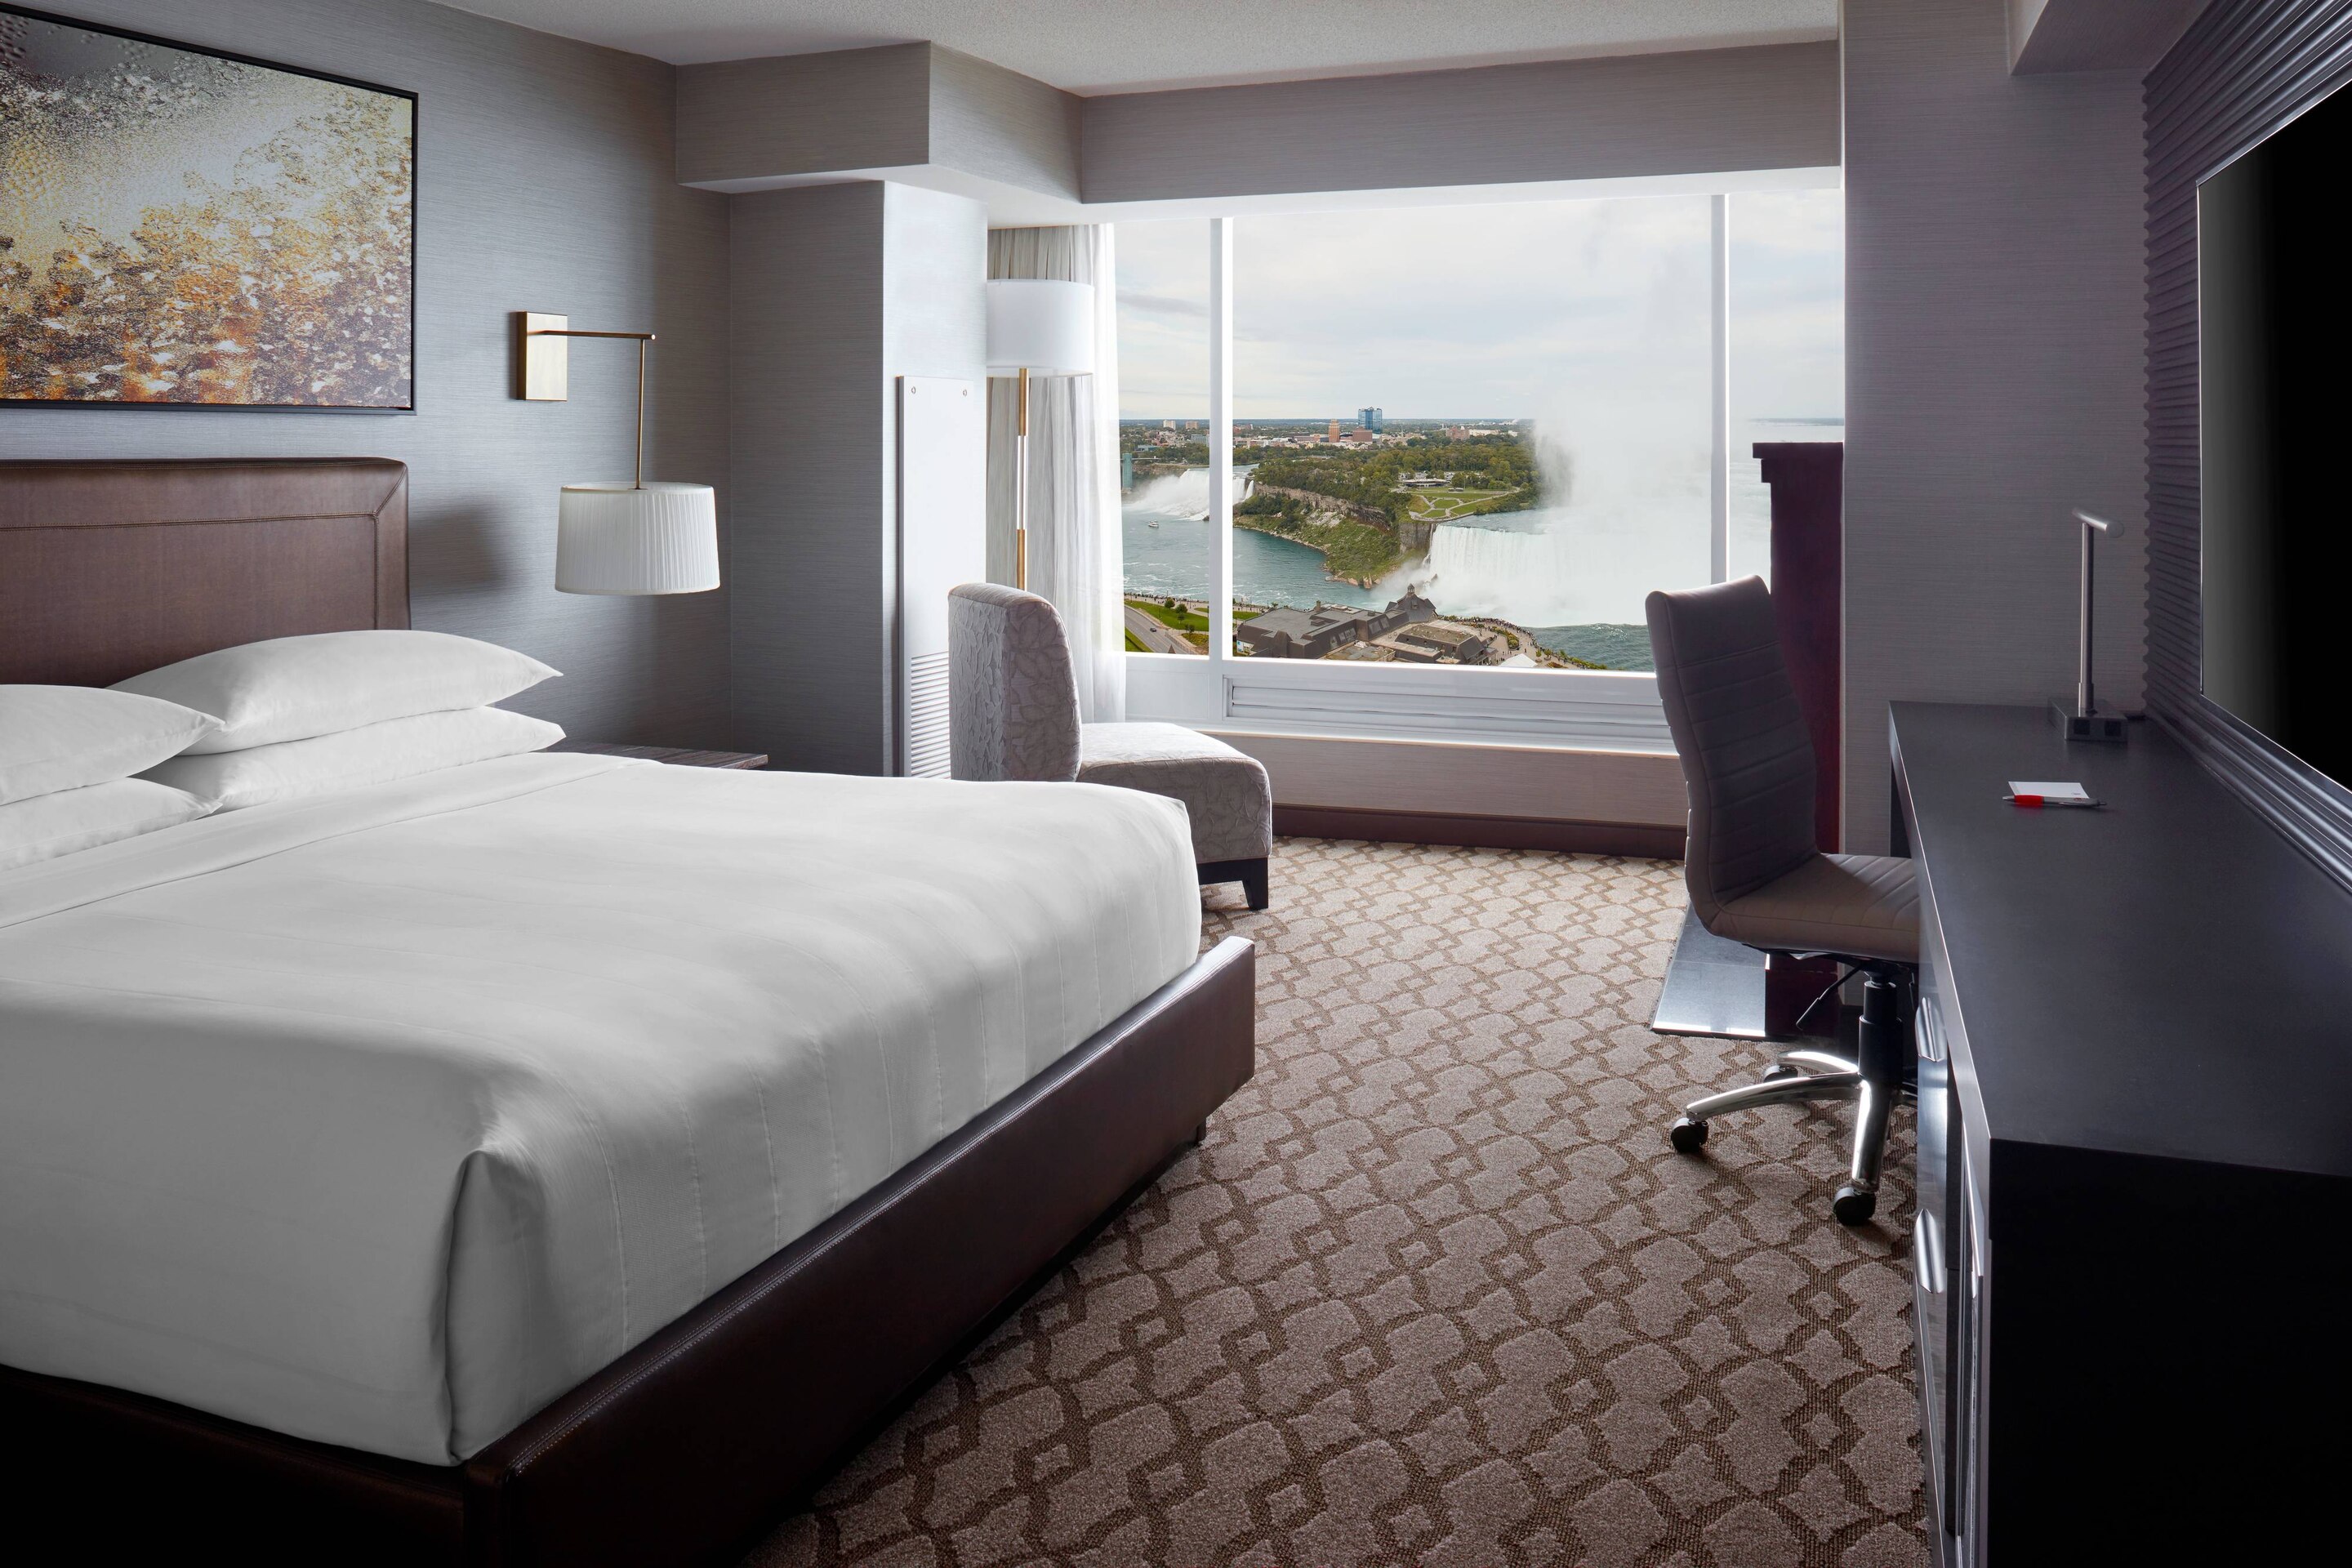 Niagara Falls Marriott Fallsview Hotel & Spa comfortable seating in window with falls view